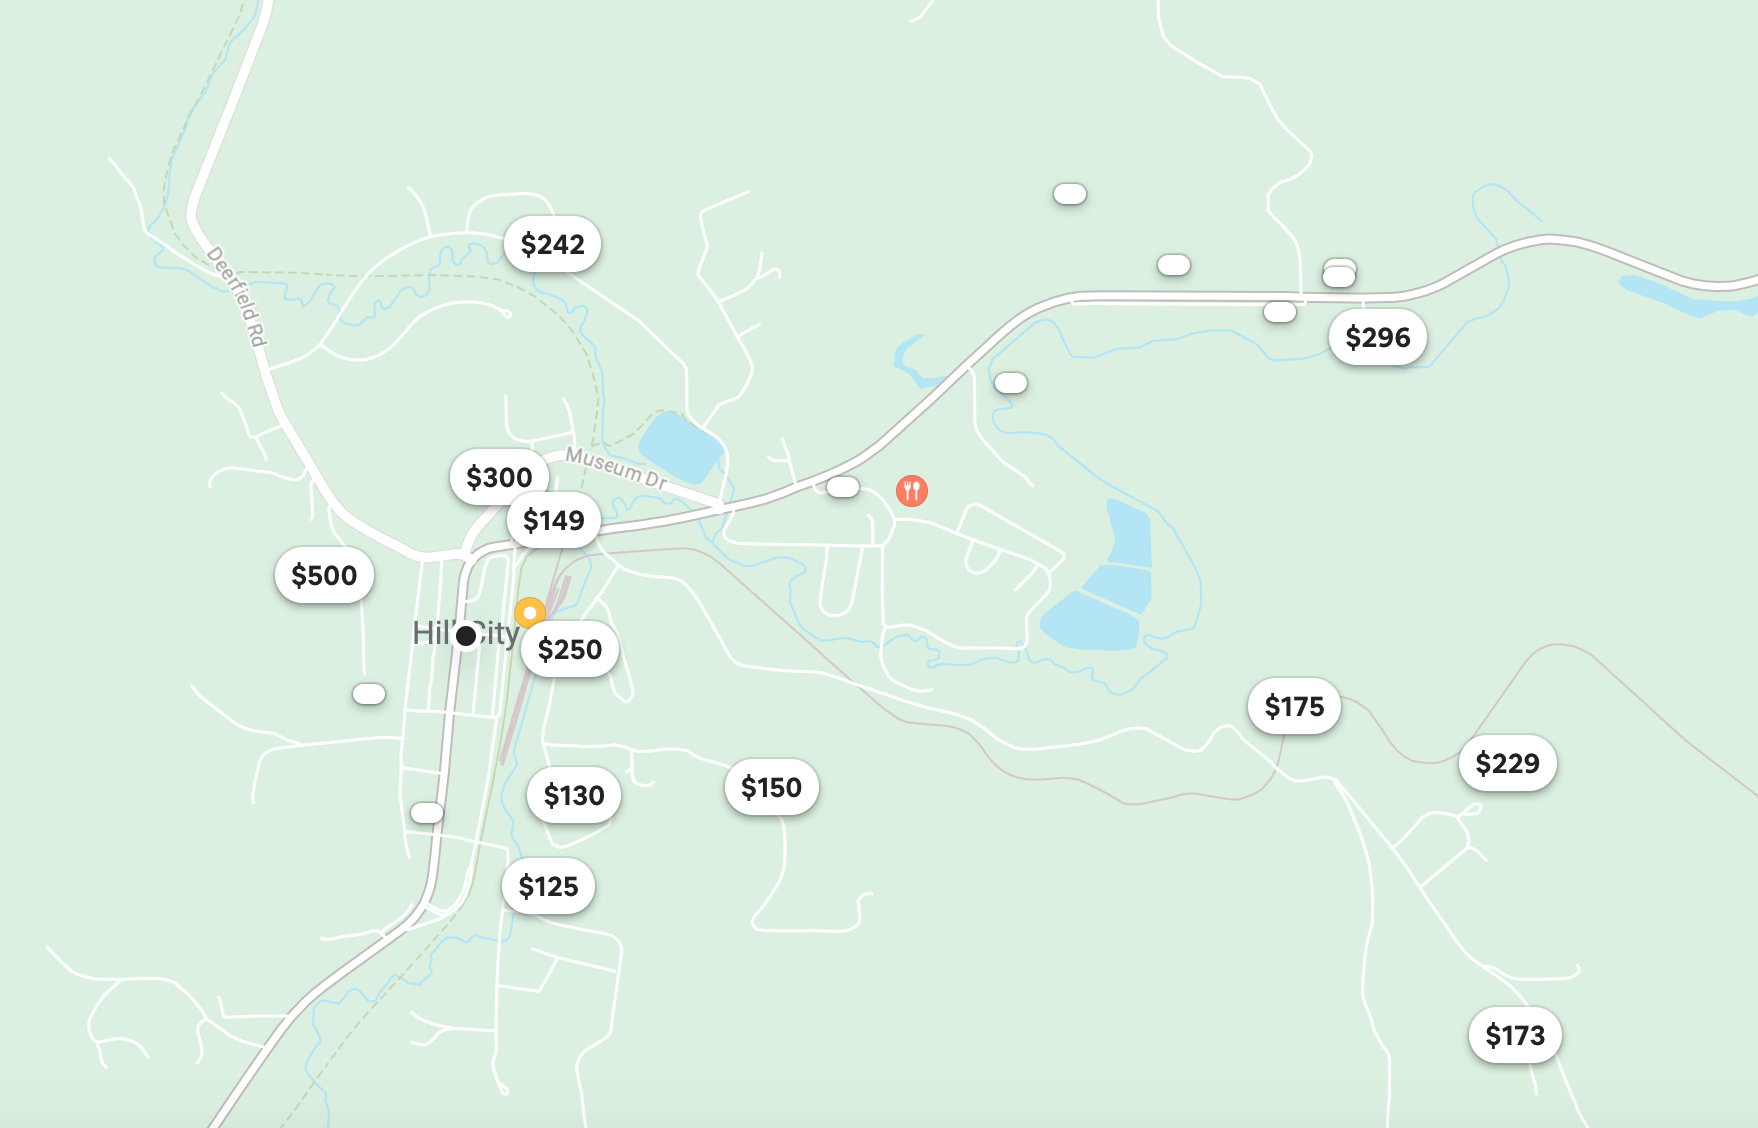 Airbnb's available in Hill City